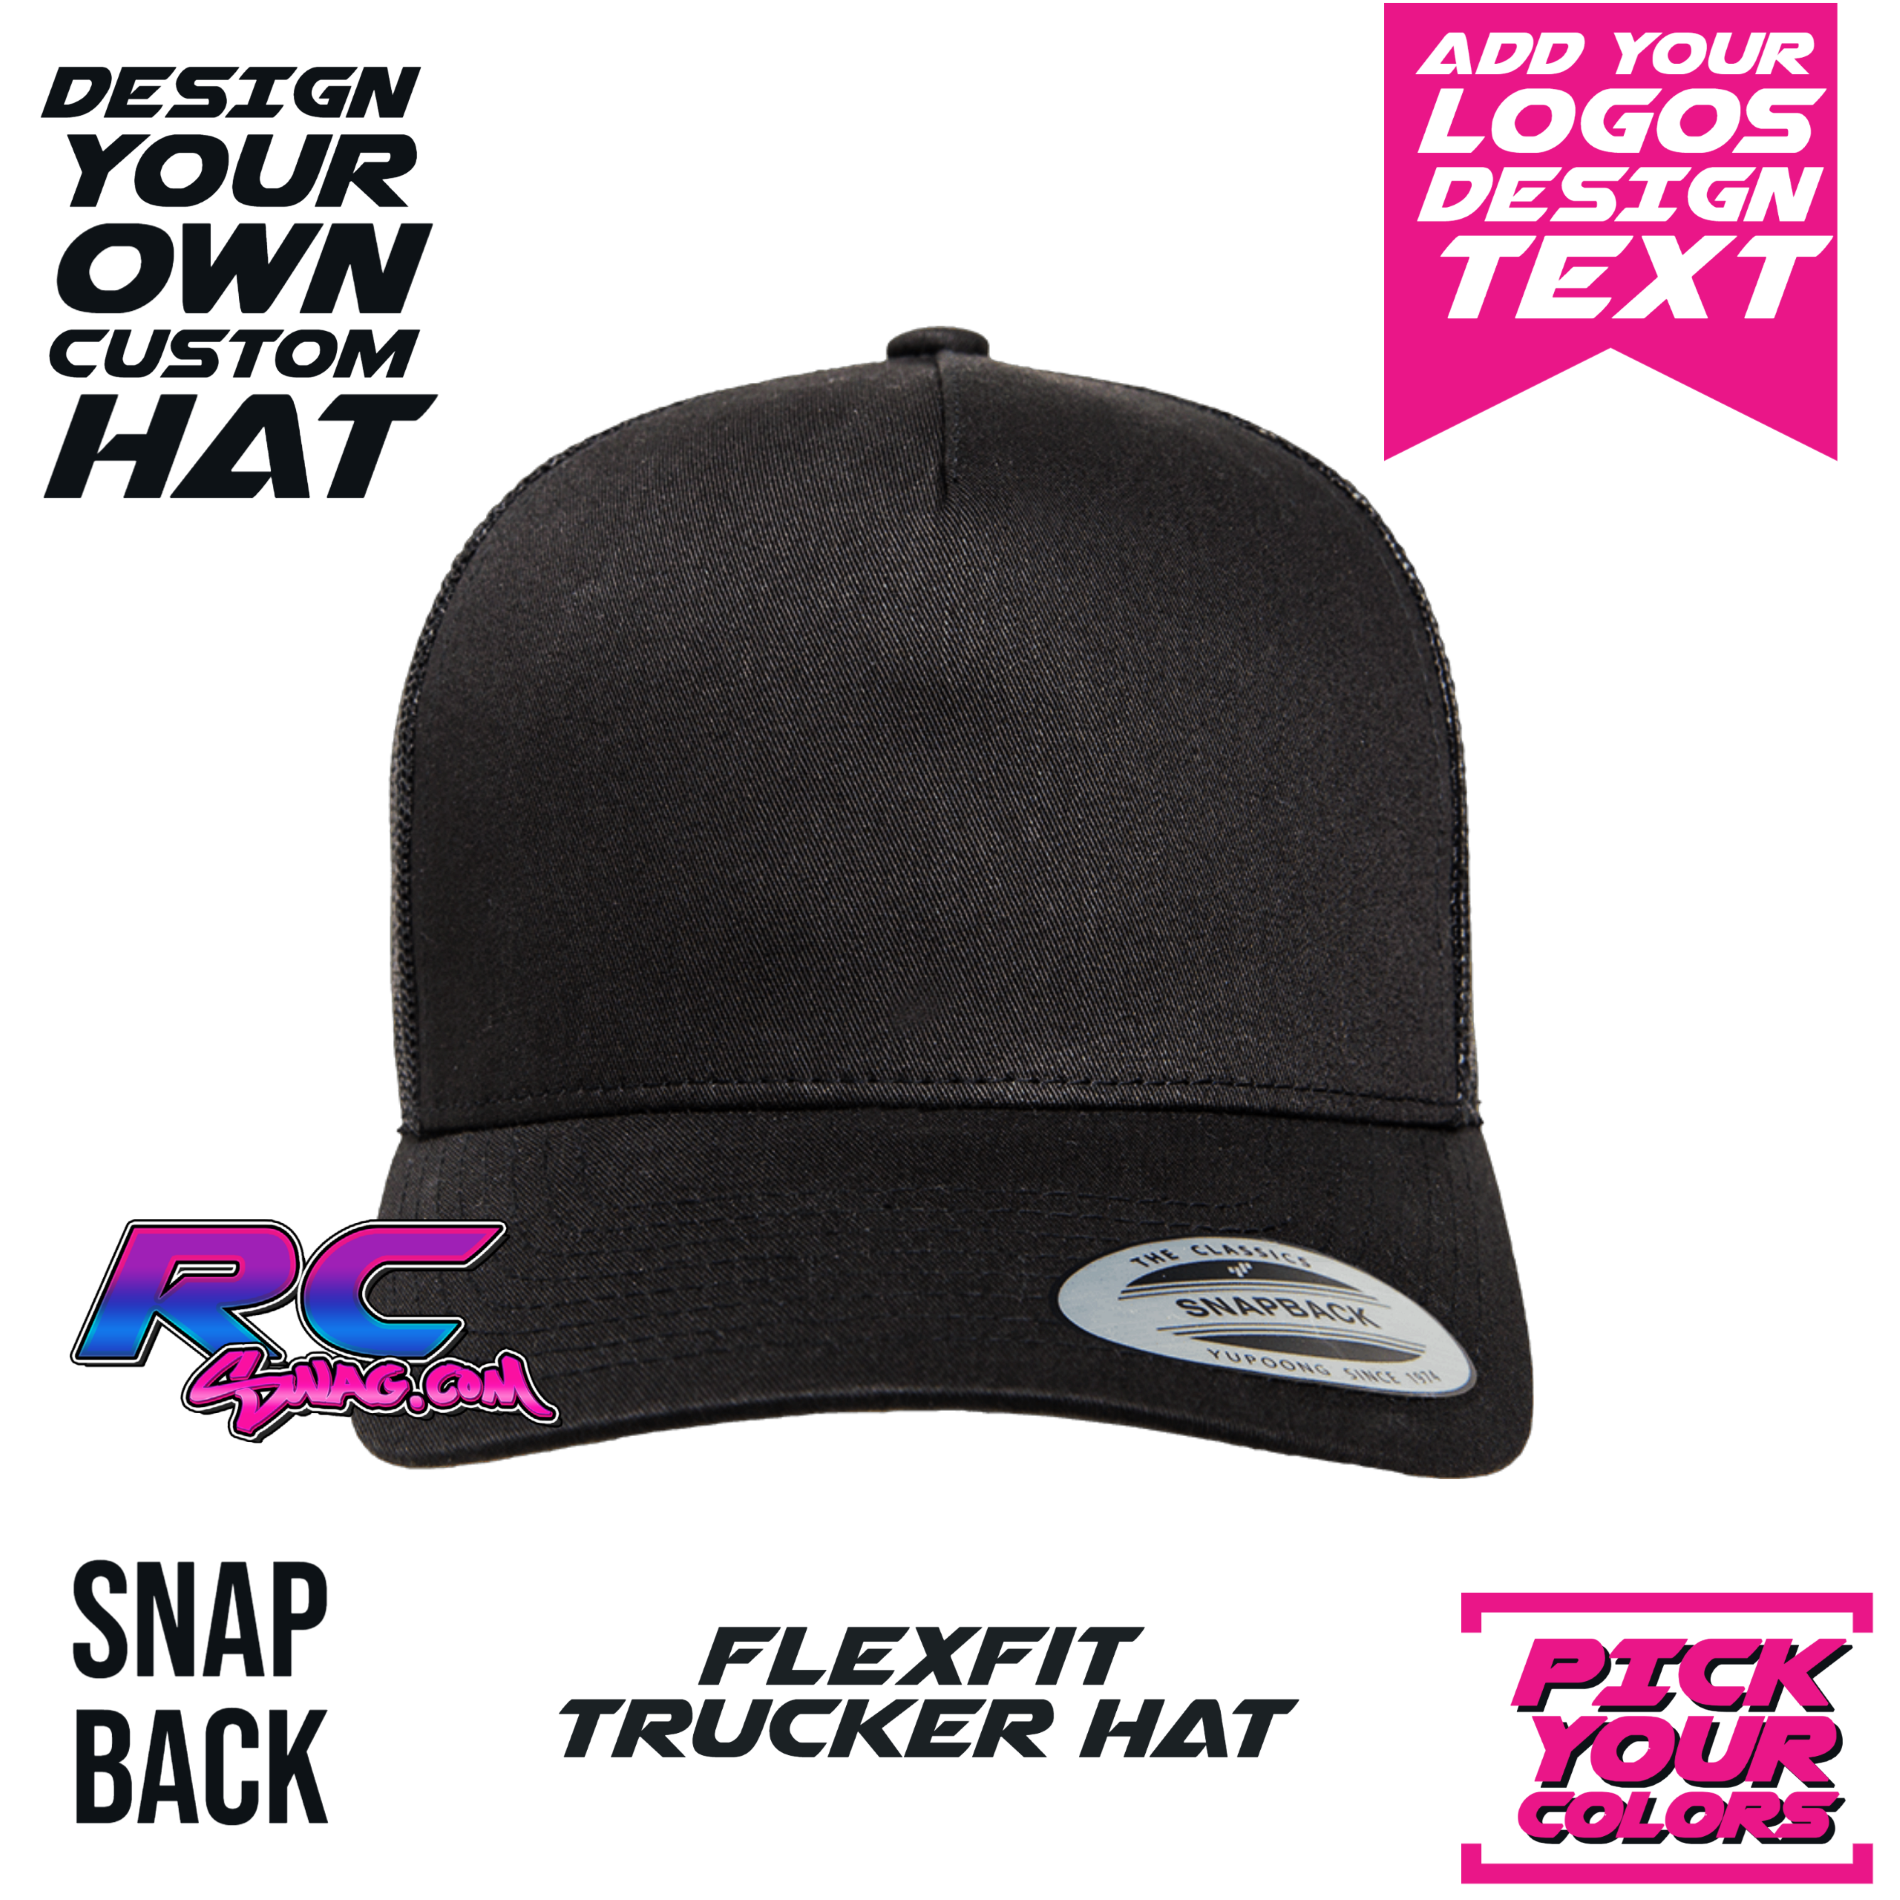 Design Your Own Custom - FlexFit SnapBack Trucker Hat - RC SWAG - Stickers,  T-Shirts, Hoodies, RC Kits & More!